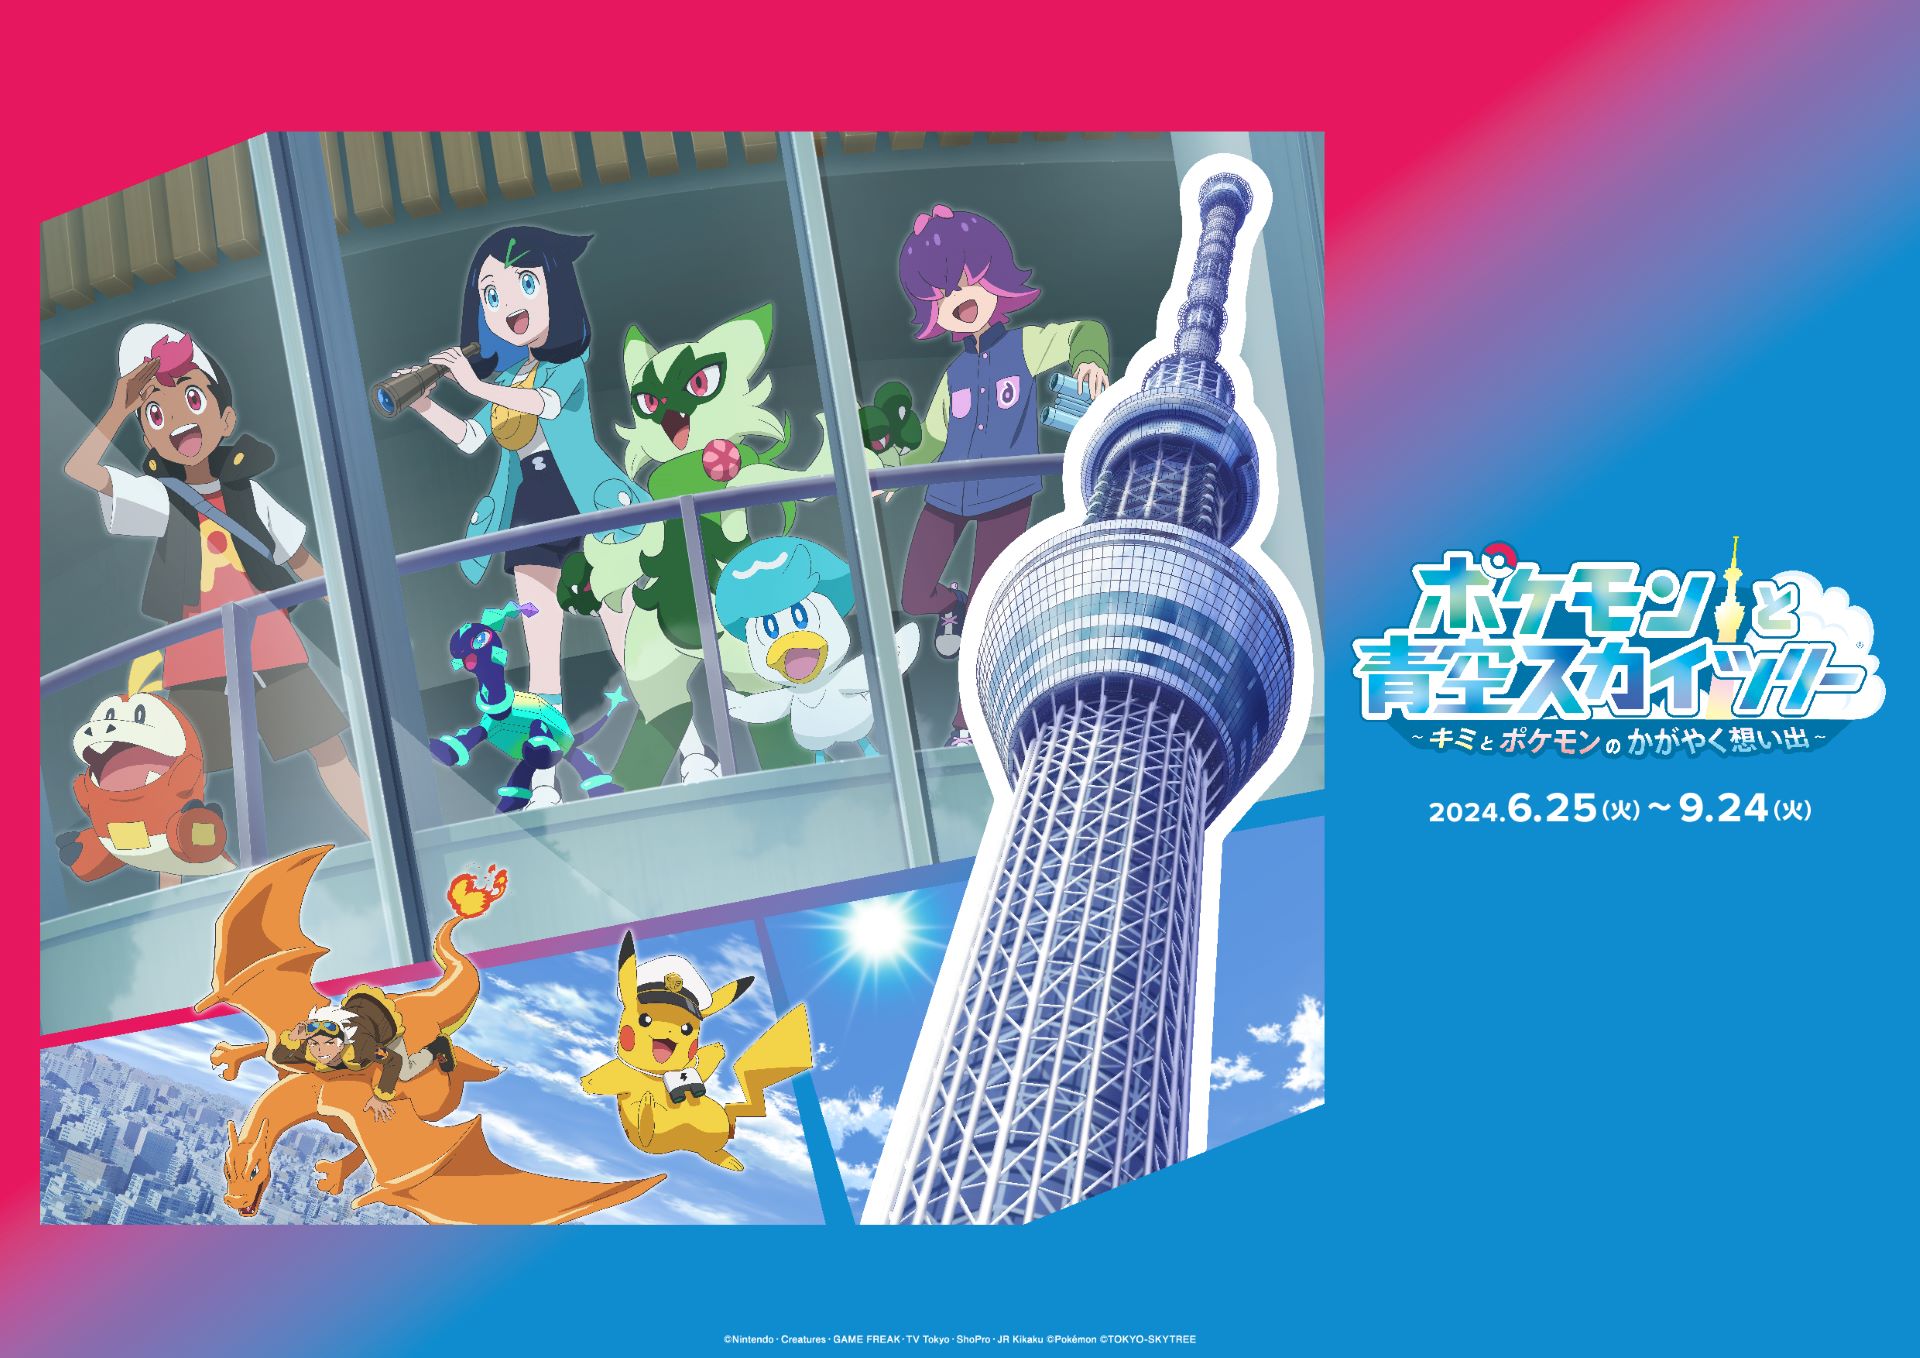 English News - TOKYO SKYTREE, TV Anime Pokemon to Hold 1st Joint Event -- "Pokemon Horizons: The Series 'POKEMON in TOKYO SKYTREE'" from June 25 to September 24, 2024